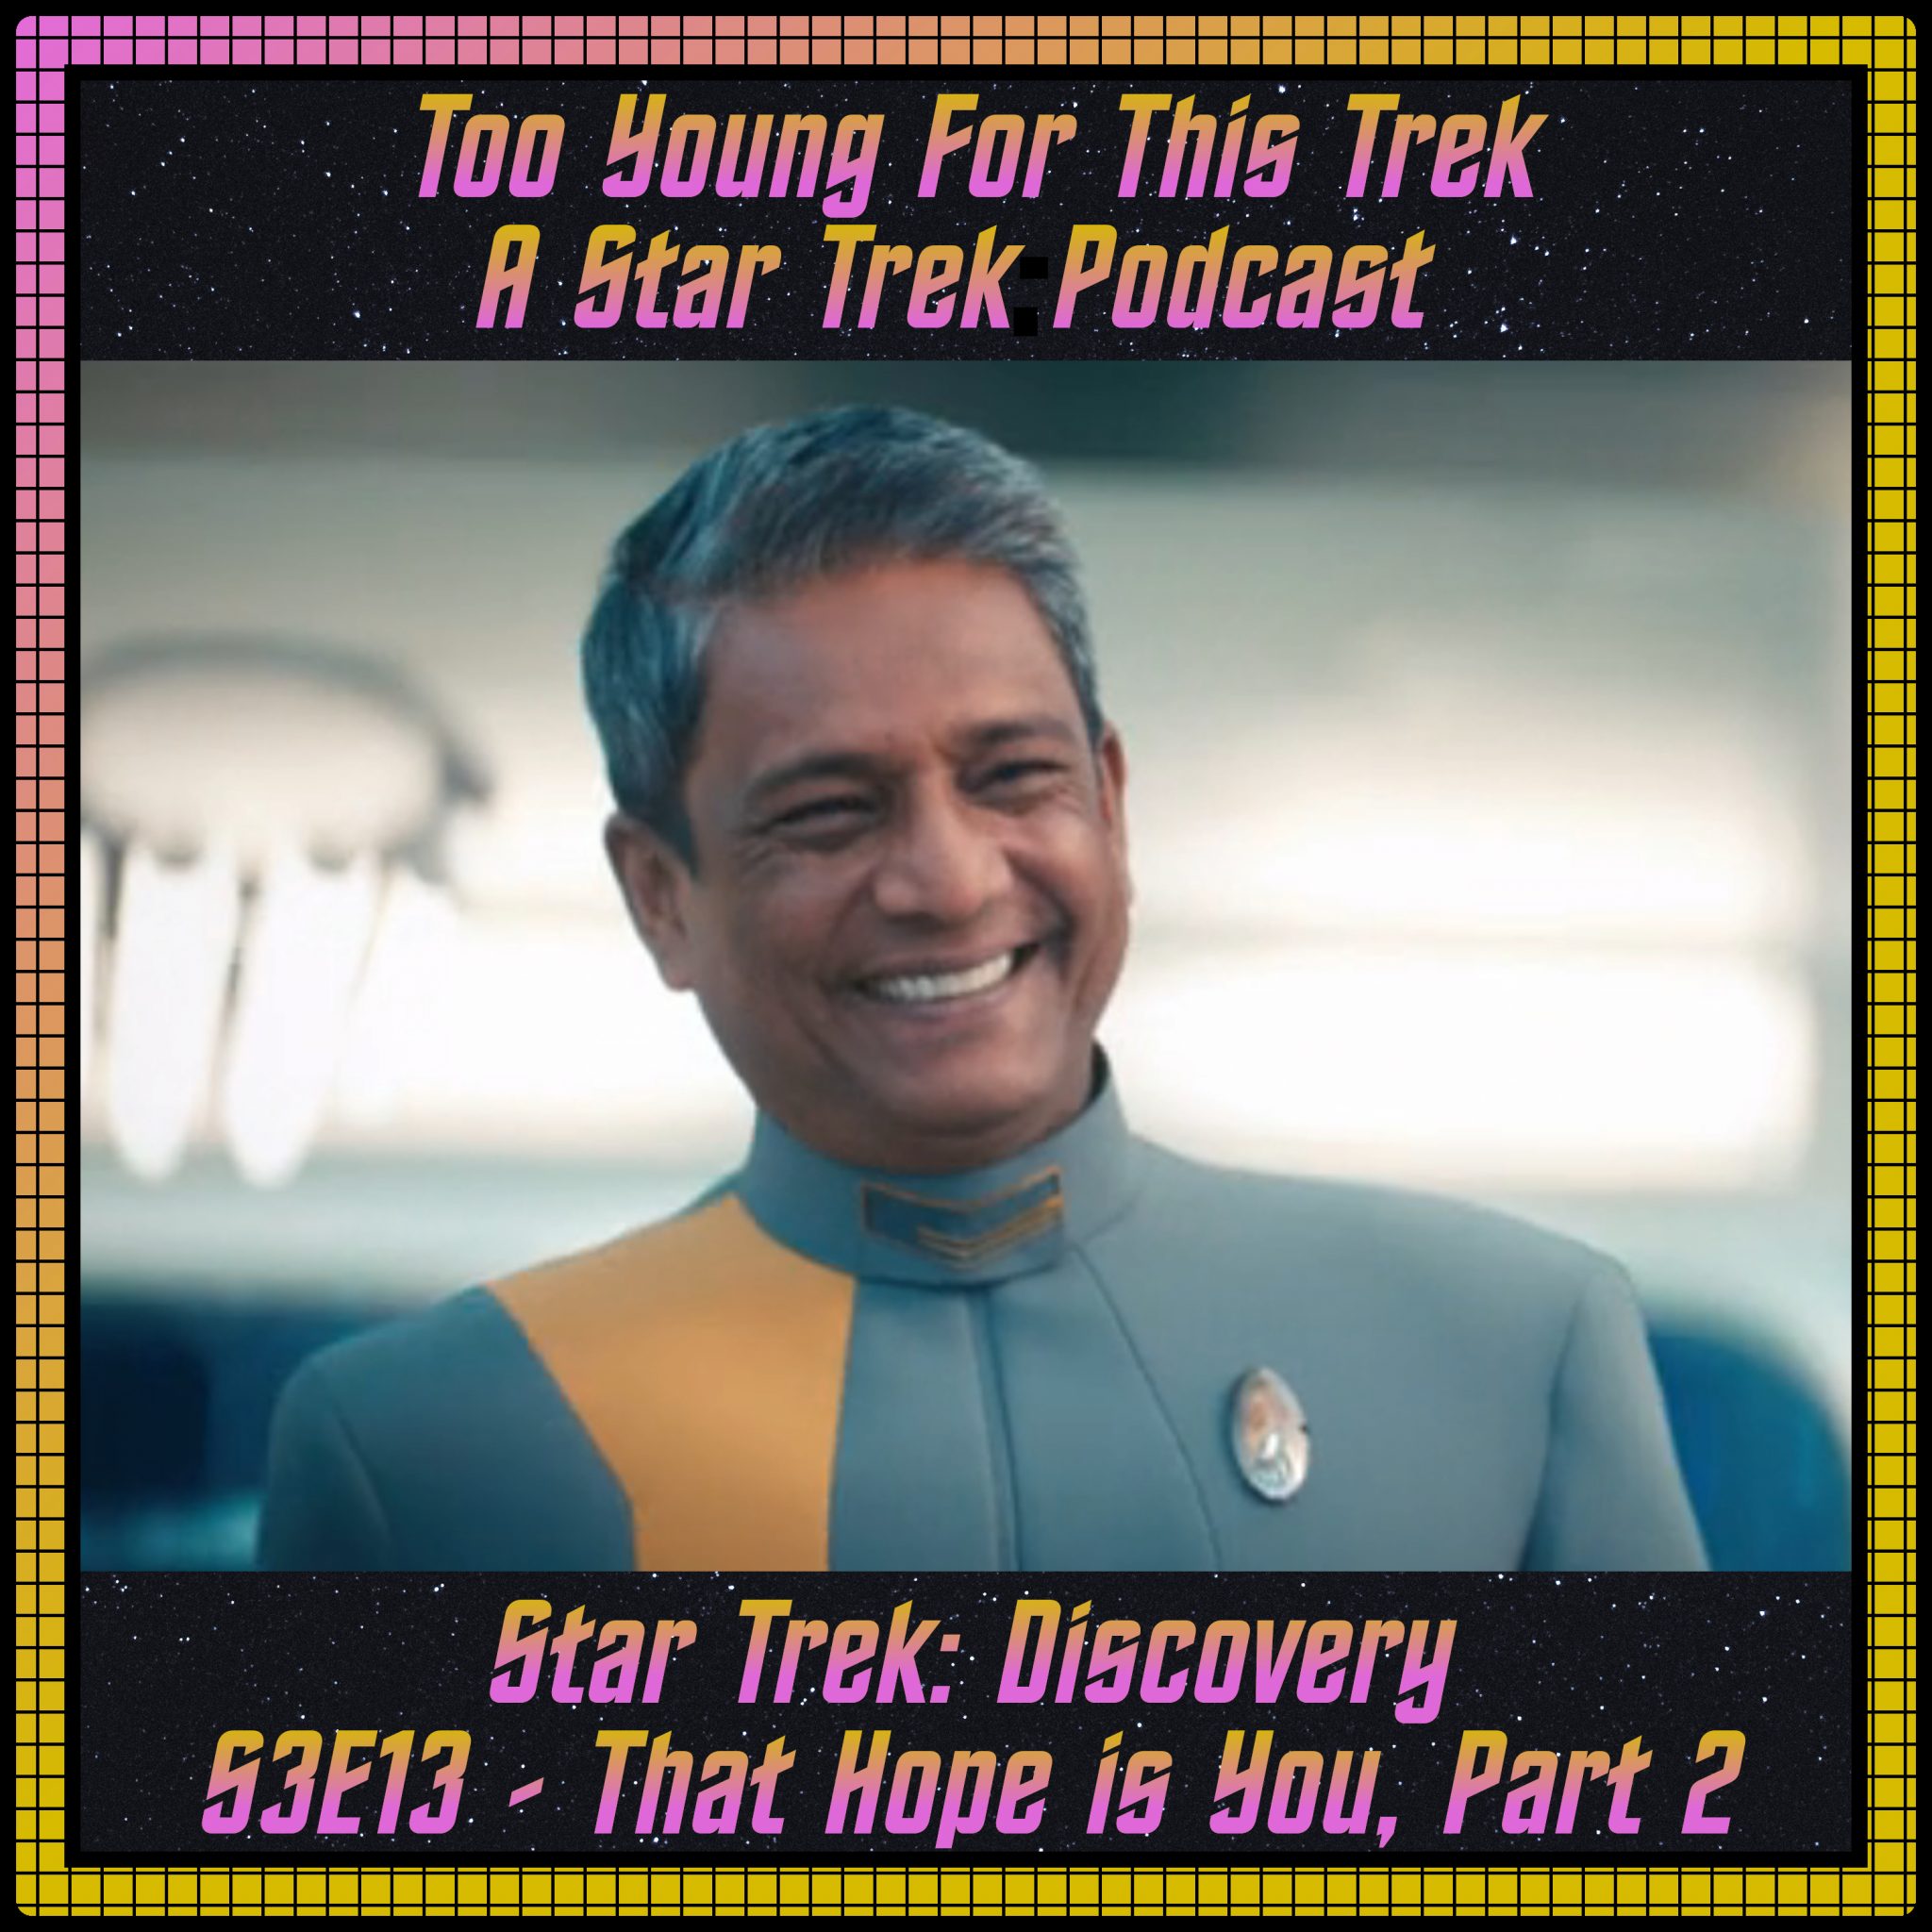 Star Trek: Discovery S3E13 - That Hope Is You, Part 2